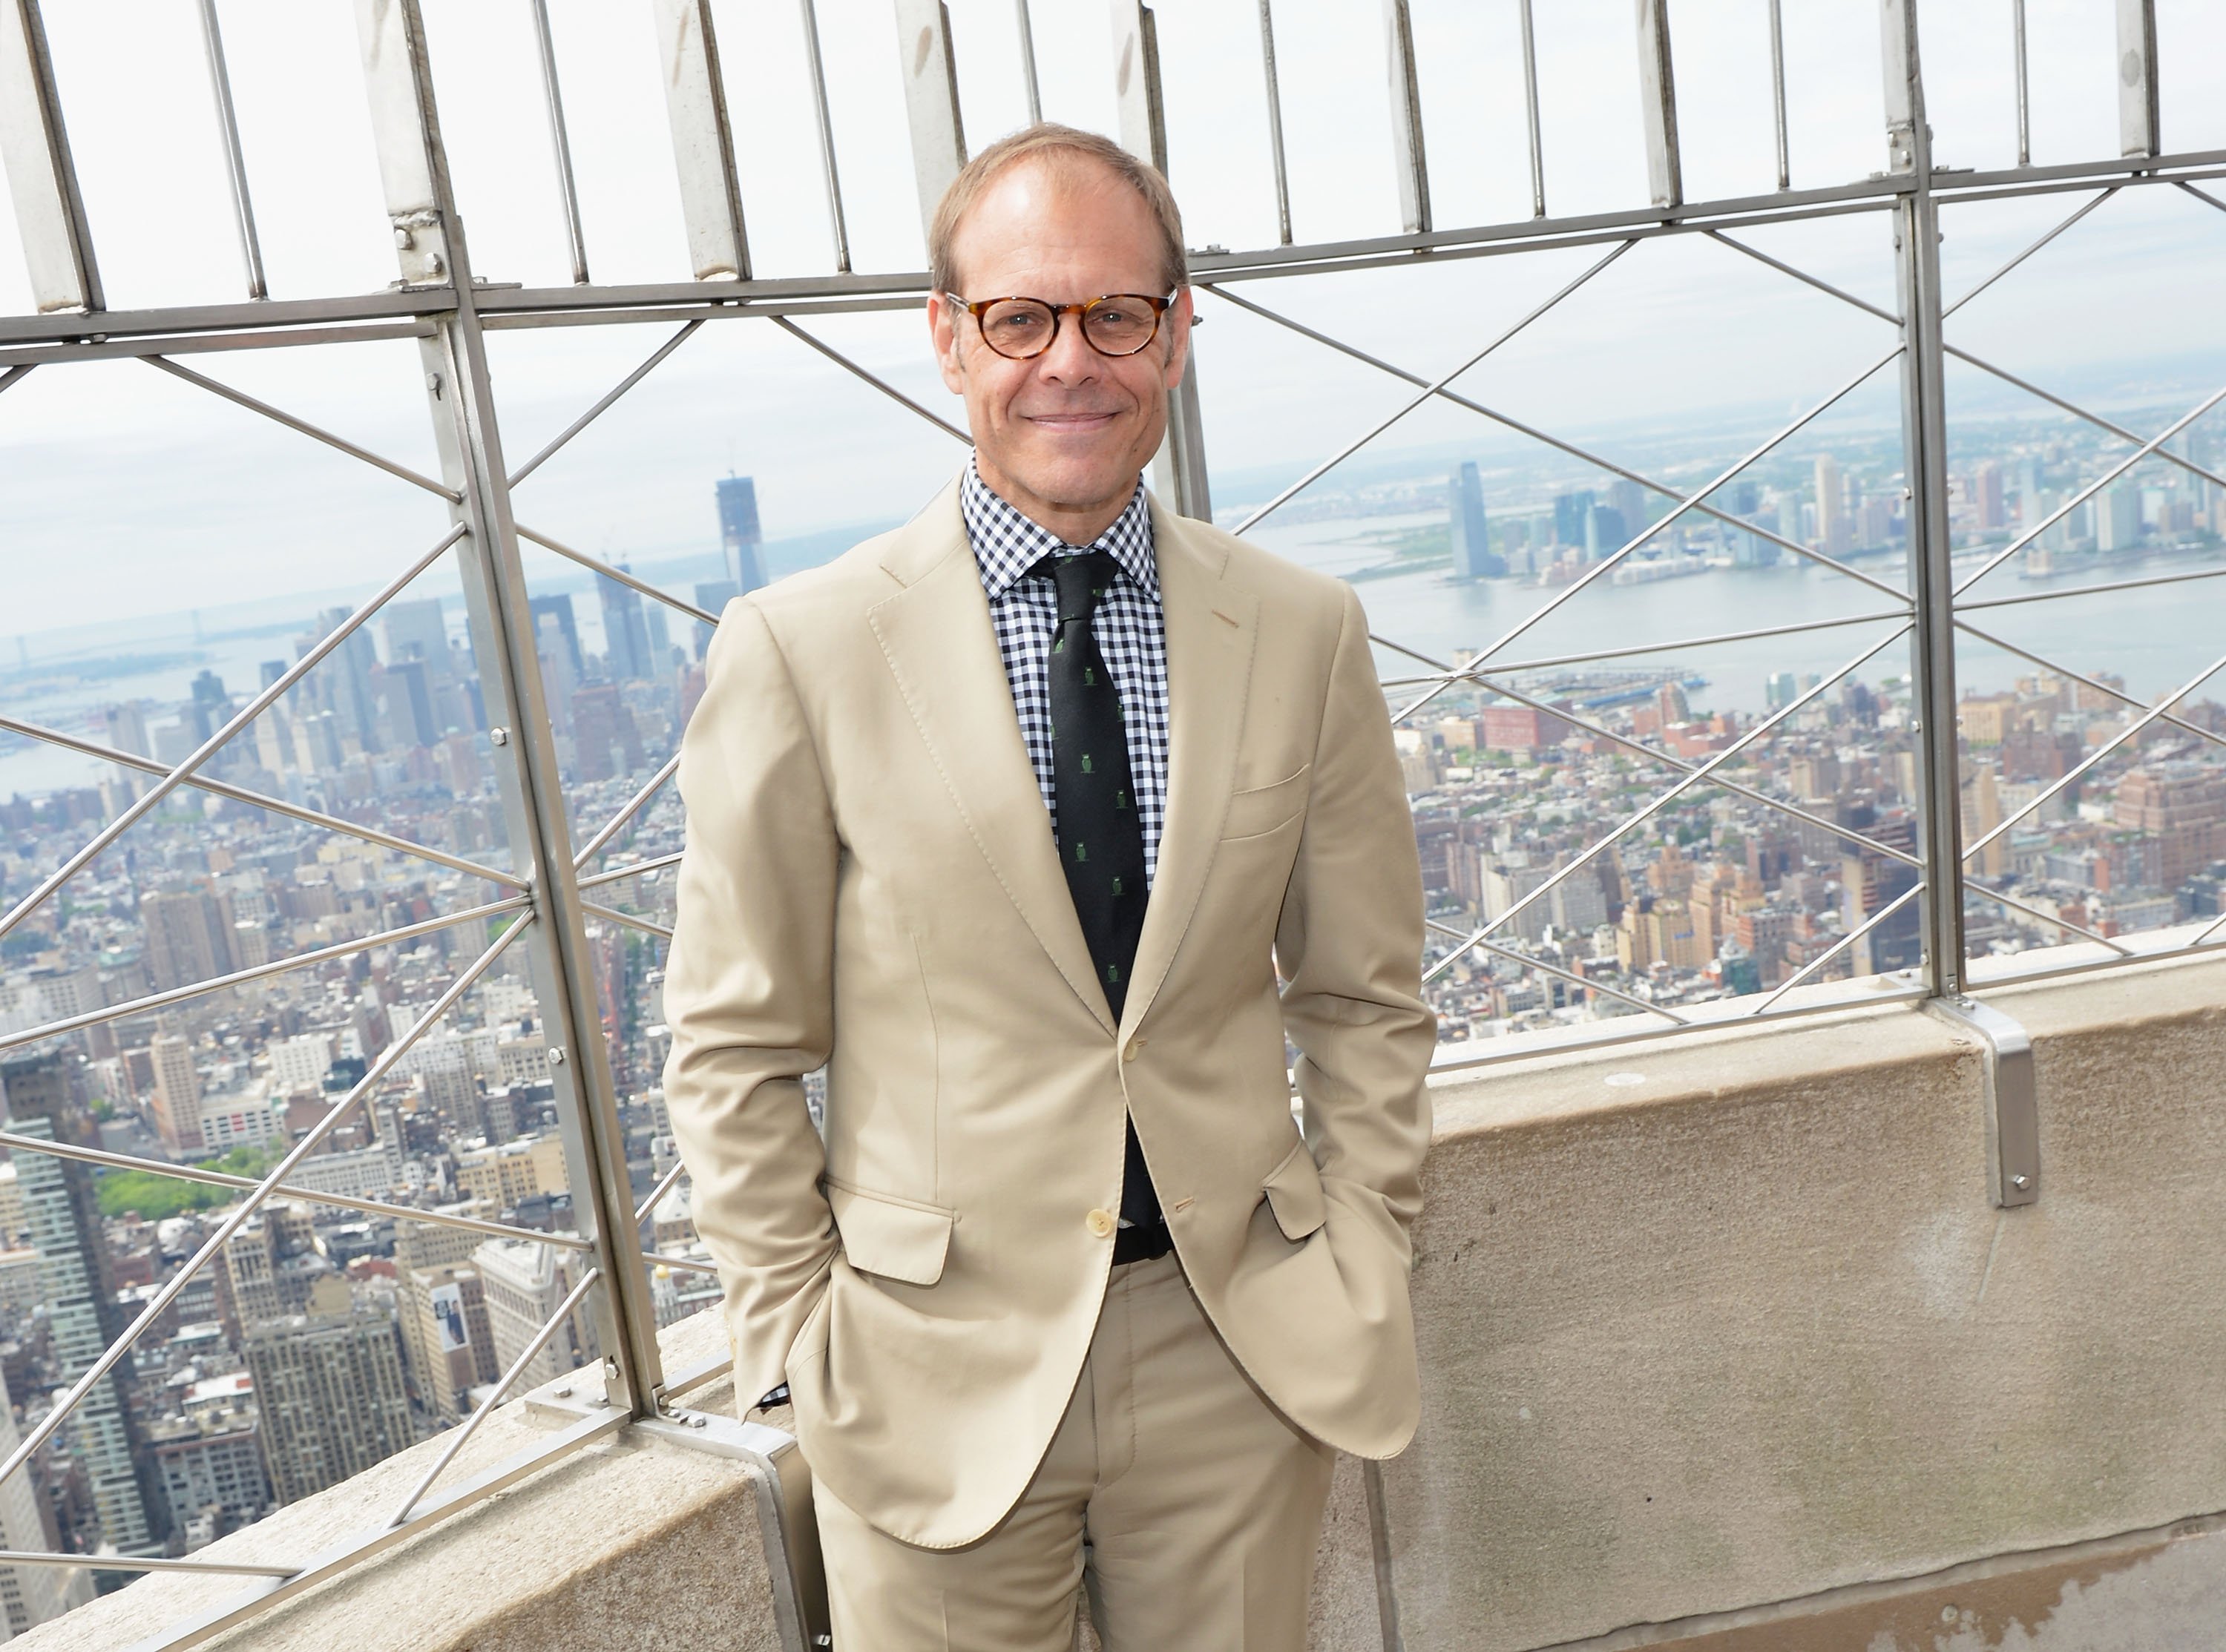 Alton Brown on a high-rise building | Photo: Getty Images